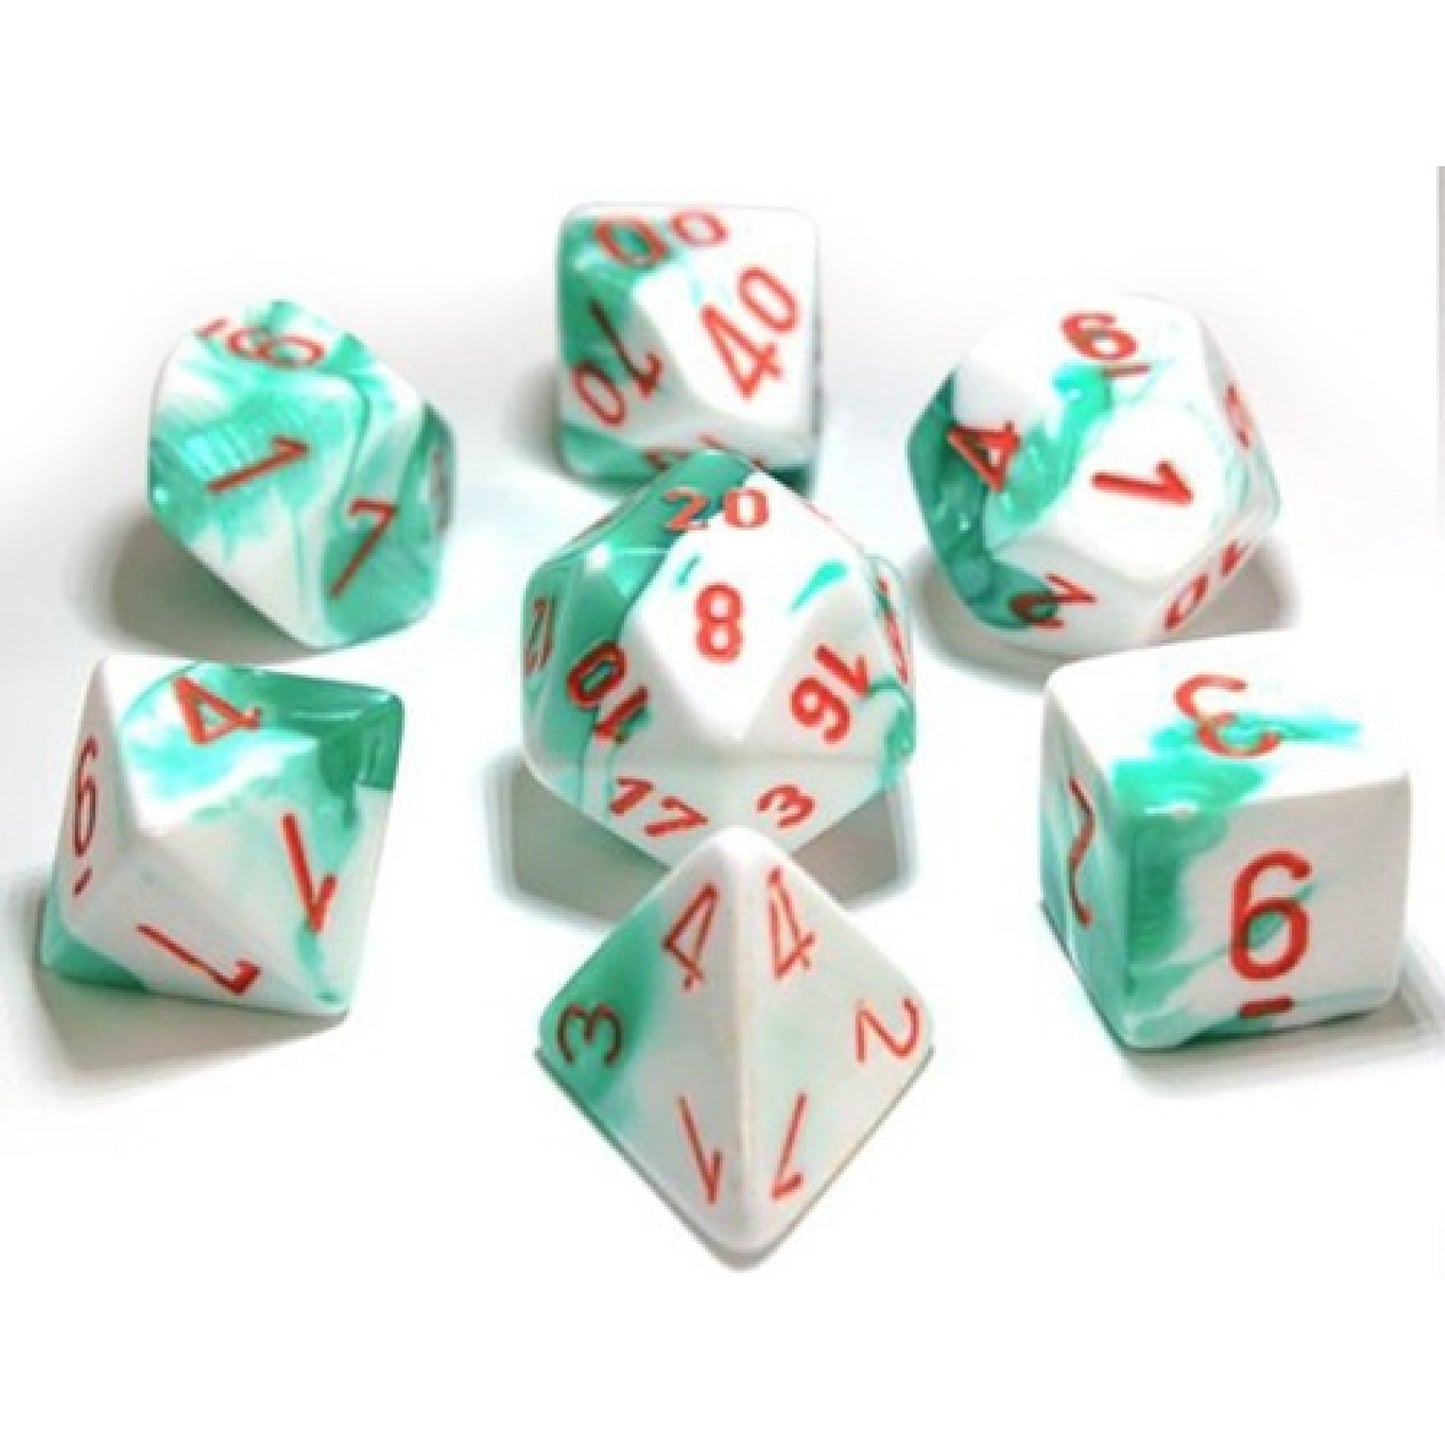 CHESSEX 7 DIE POLYHEDRAL DICE SET: LAB DICE GEMINI MINT GREEN-WHITE WITH ORANGE